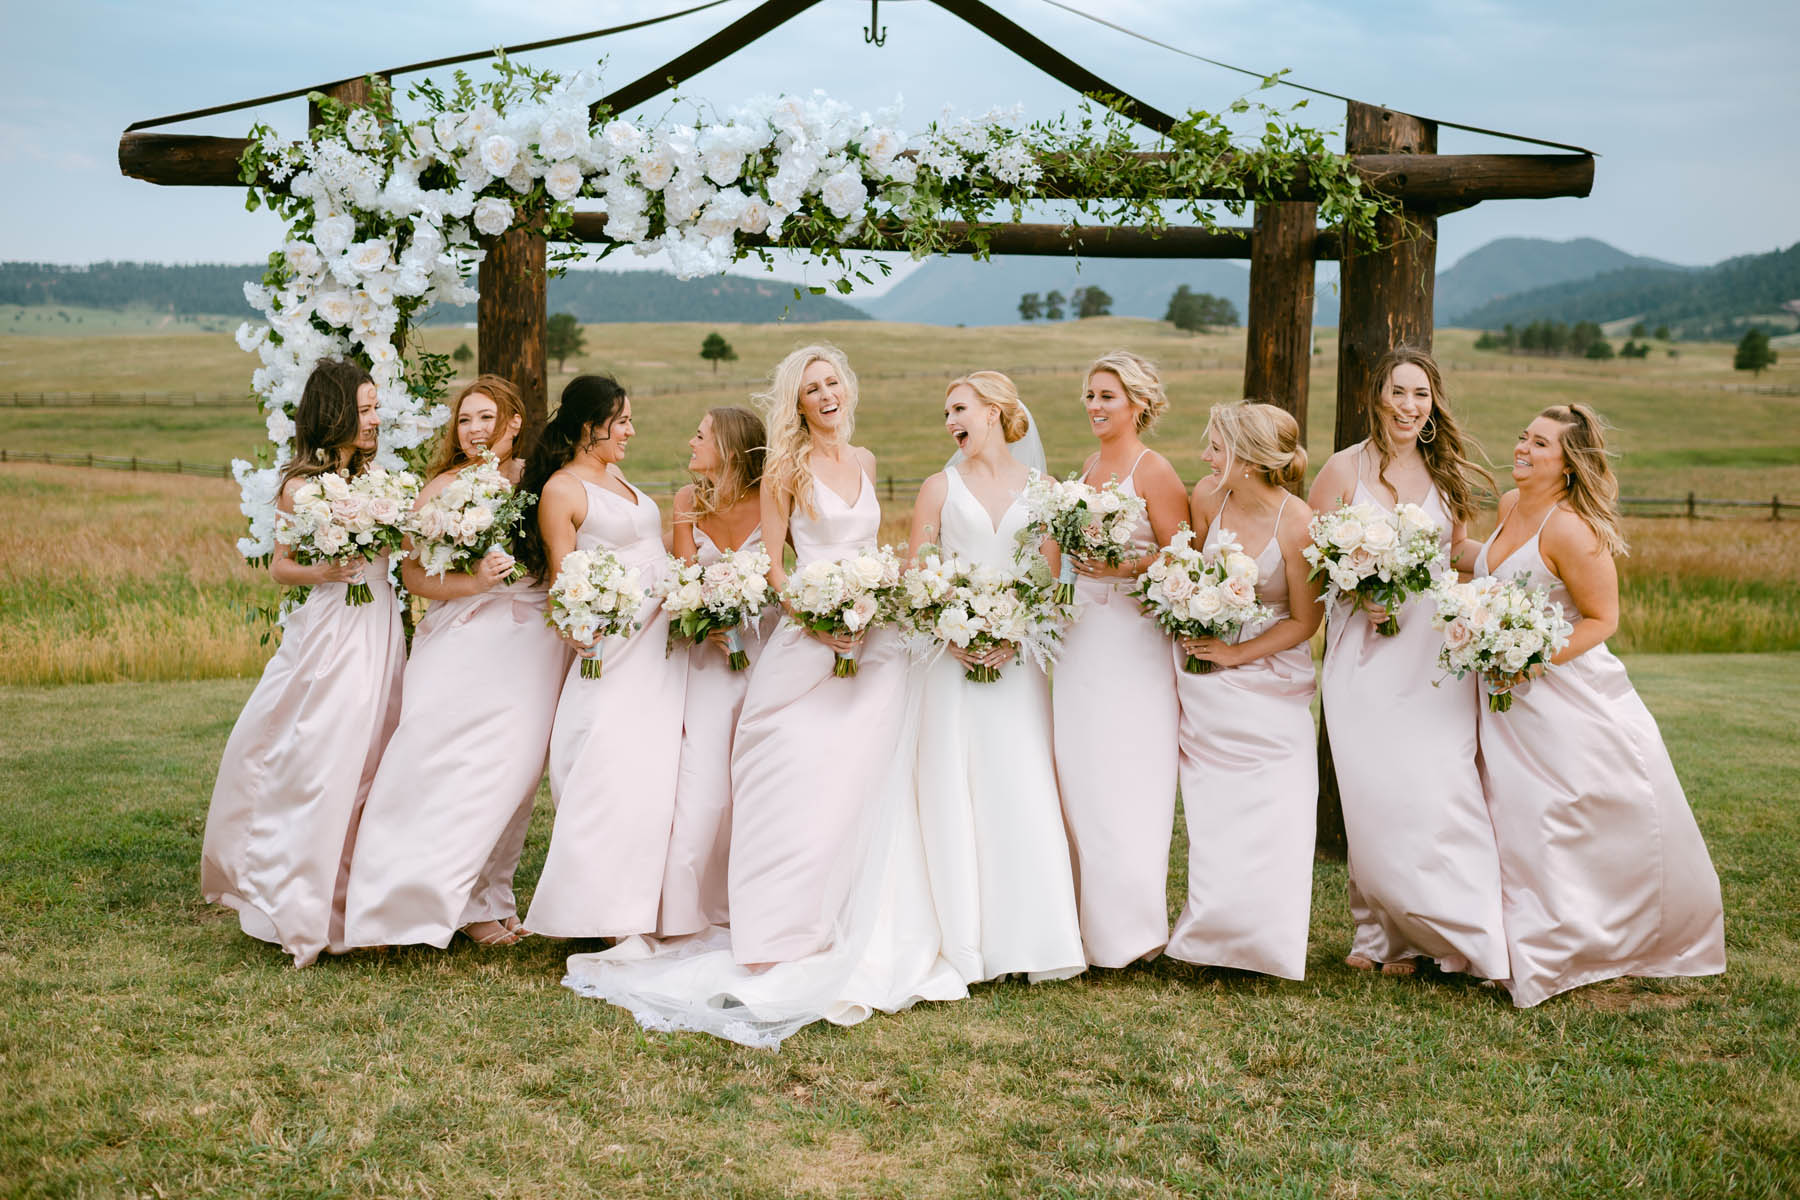 Bridesmaids in pink dresses post for wedding photos at Spruce Mountain Ranch.